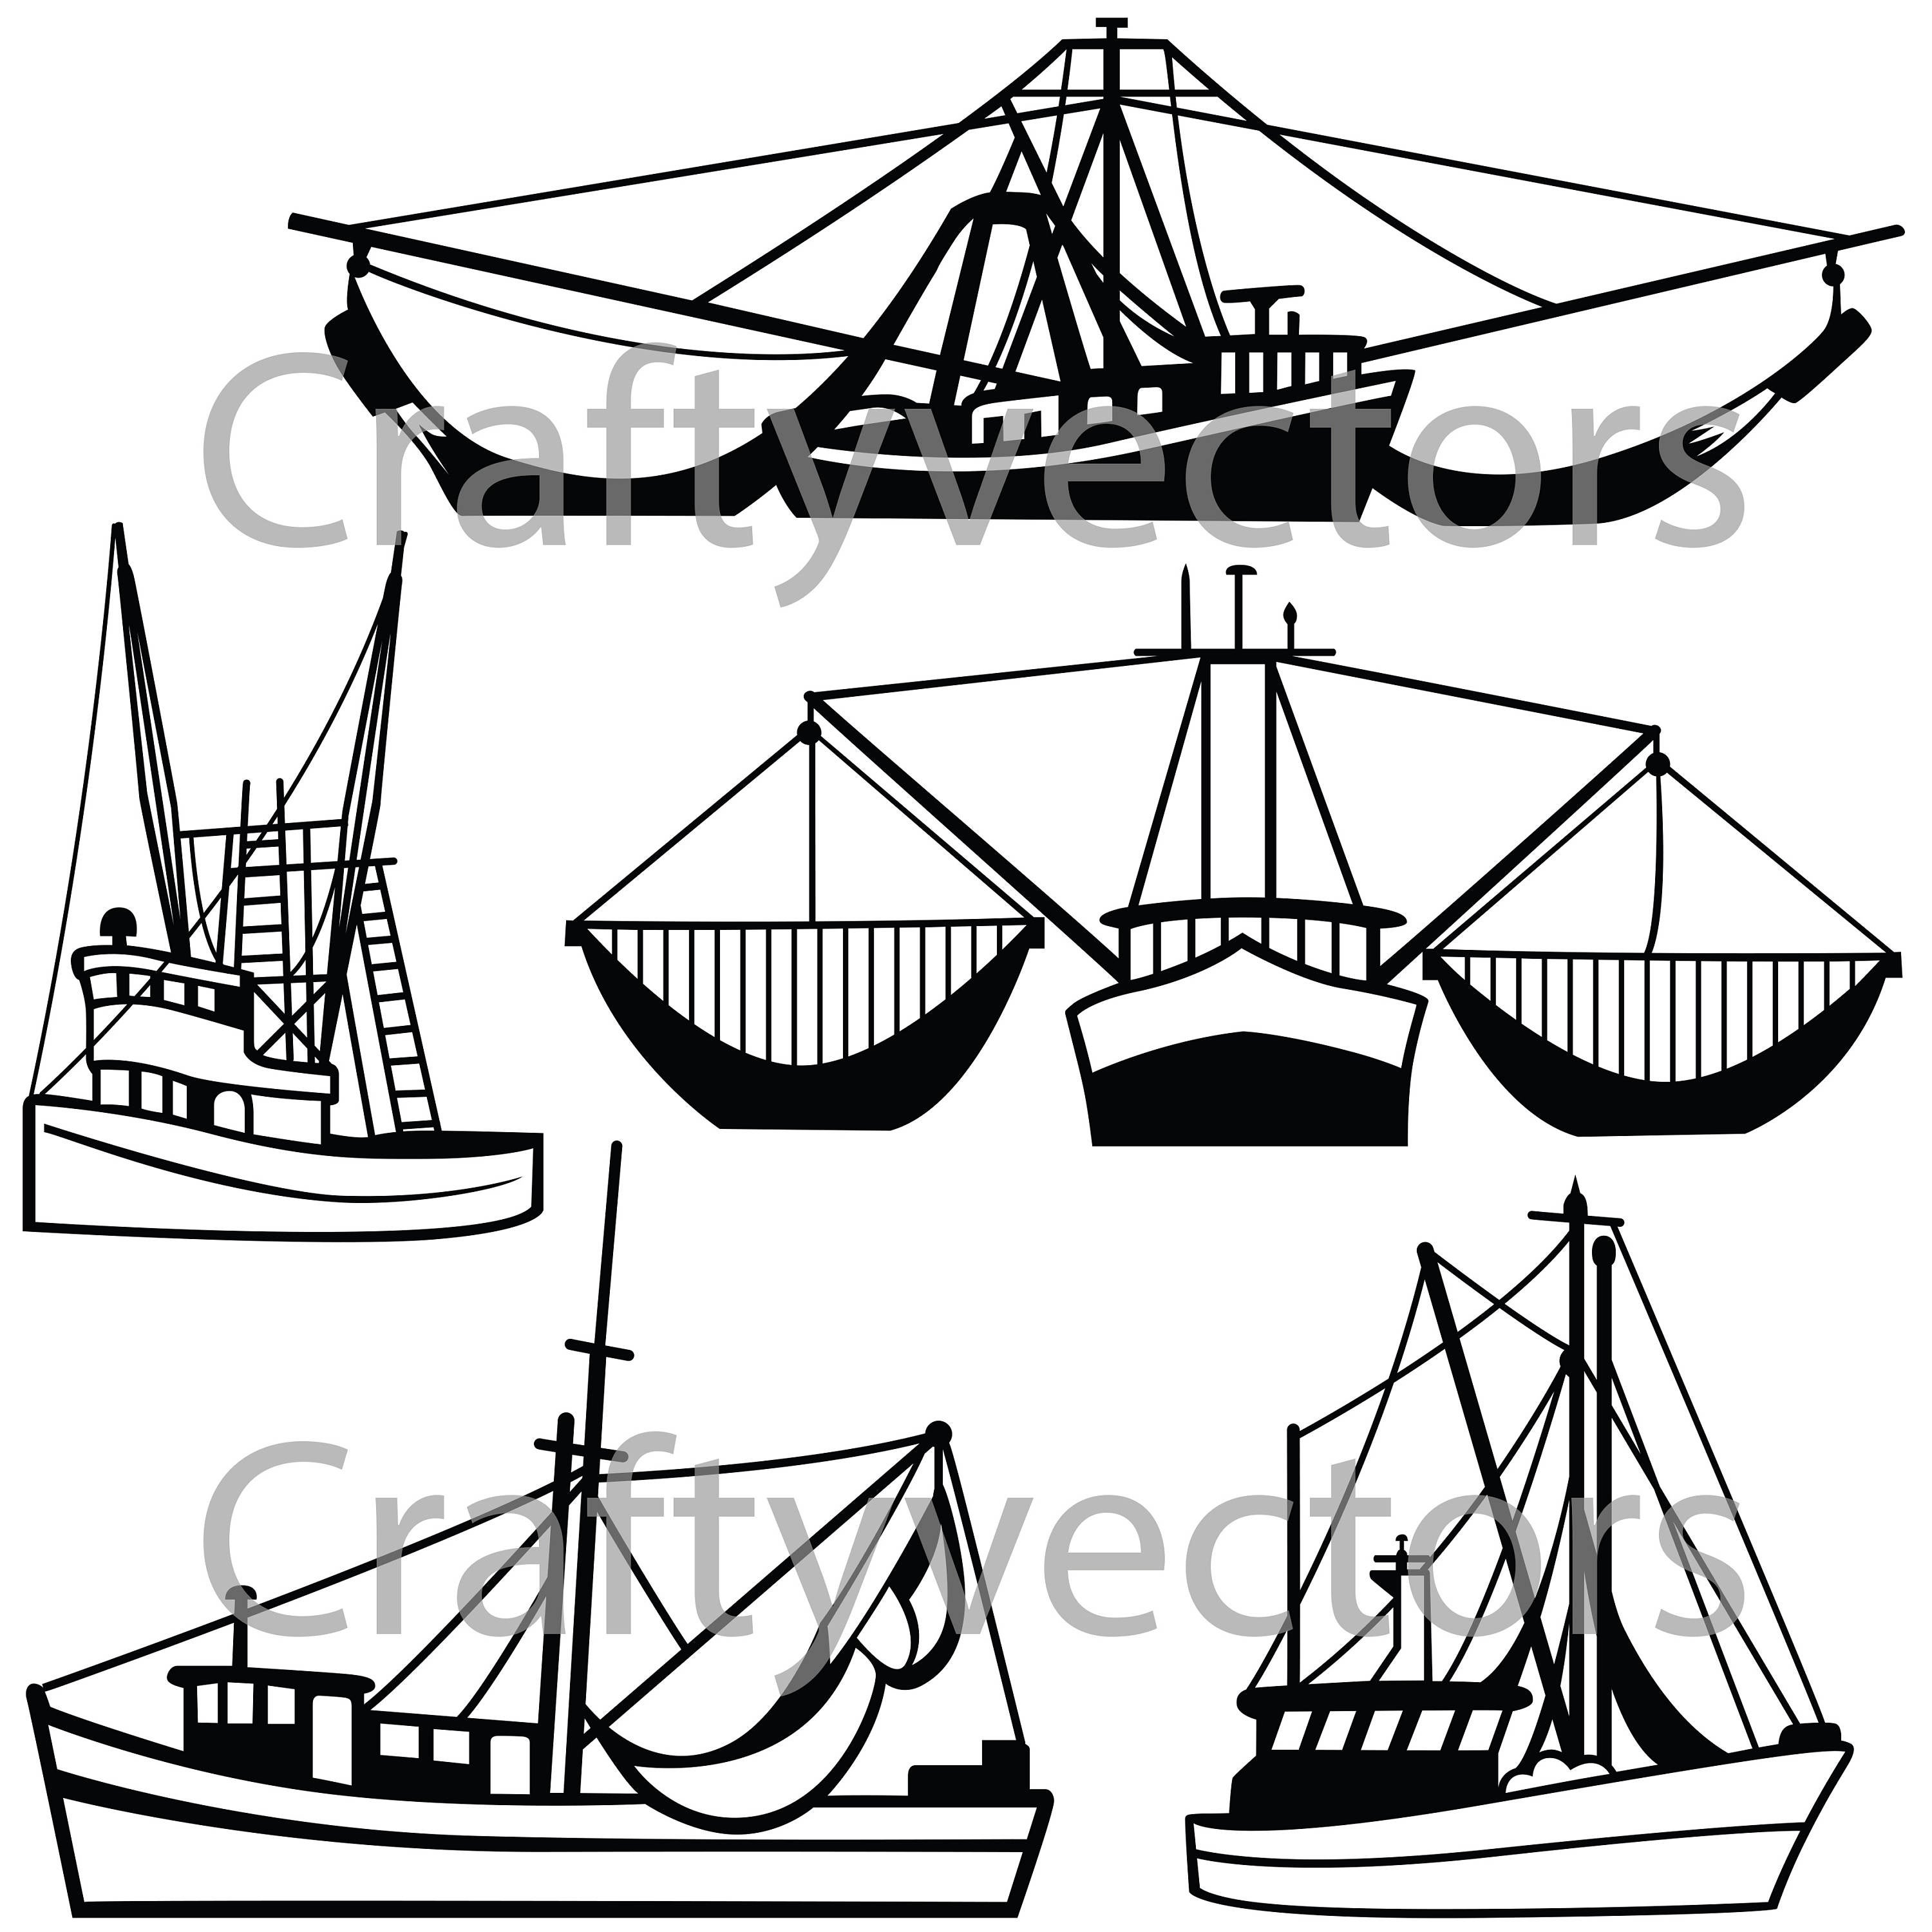 Download Shrimp Boat Vector at Vectorified.com | Collection of Shrimp Boat Vector free for personal use